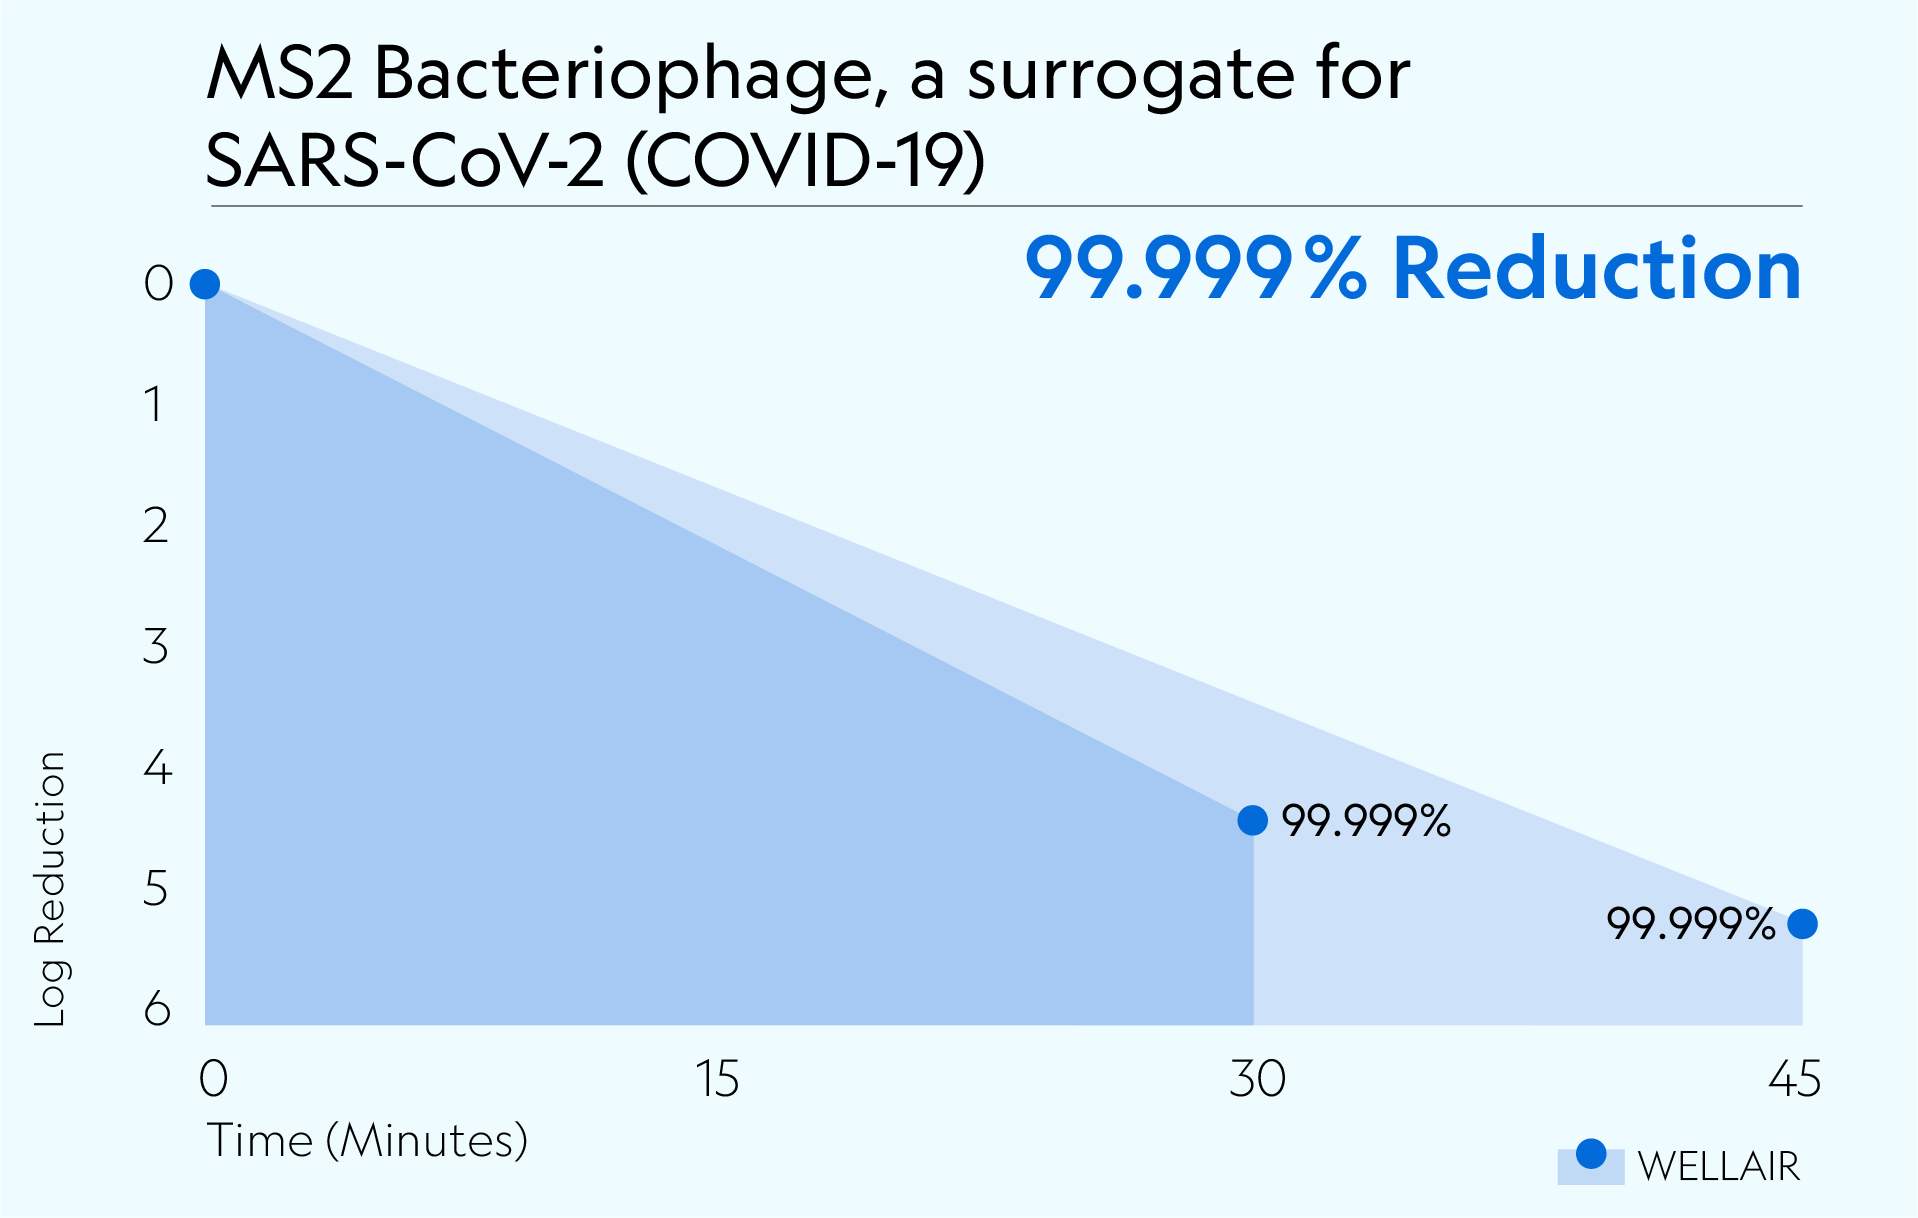 Defend 400 achieved 99.999% reduction of MS2 Bacteriophage, surrogate for SARS-CoV-2